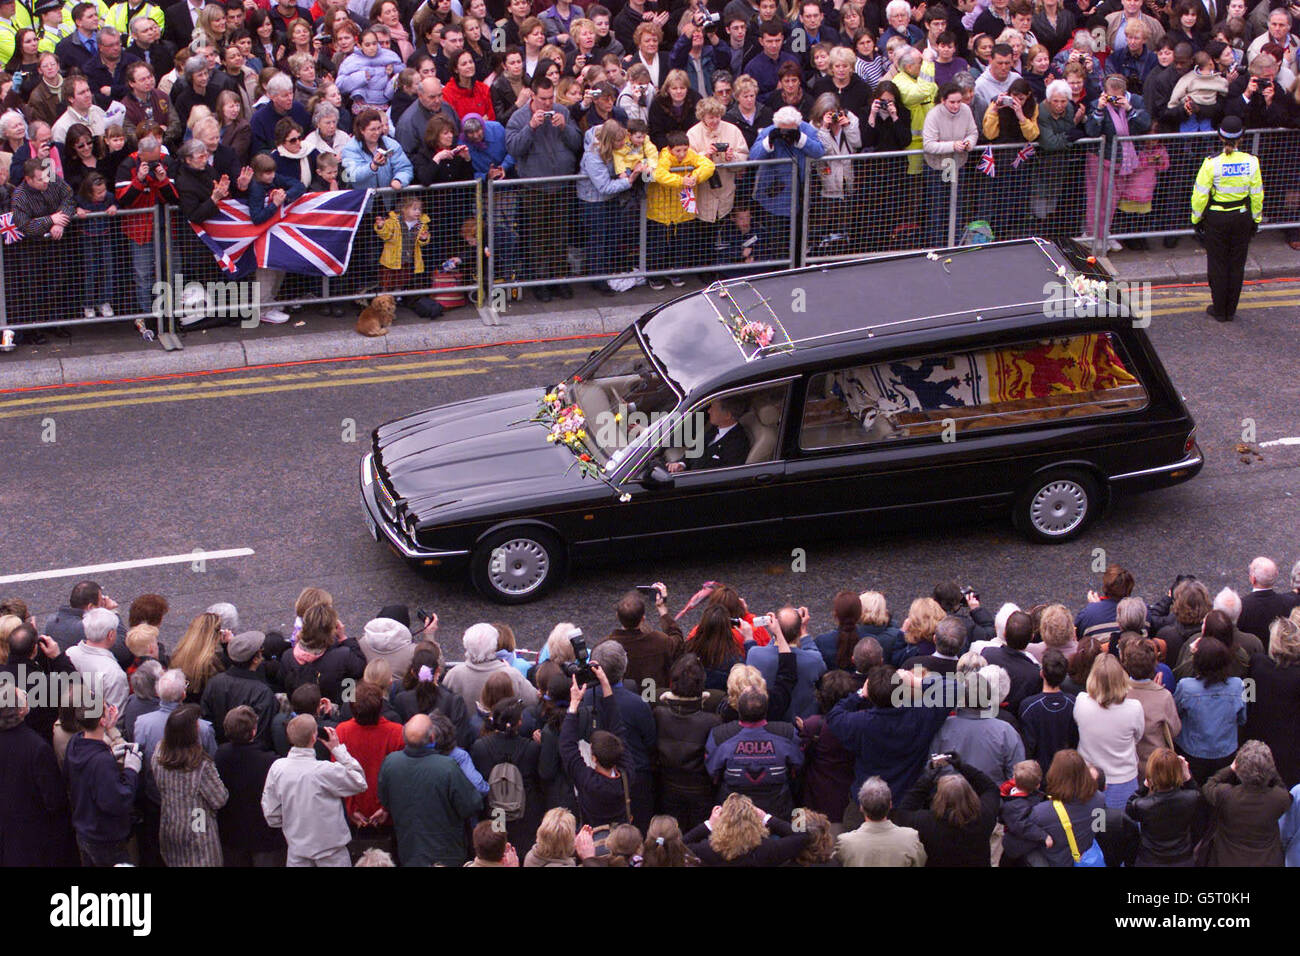 The coffin of Queen Elizabeth the Queen Mother arrives at Windsor Castle, following her funeral service at Westminster Abbey. The Queen Mother will be laid to rest next to her husband George VI in St George's Chapel Stock Photo